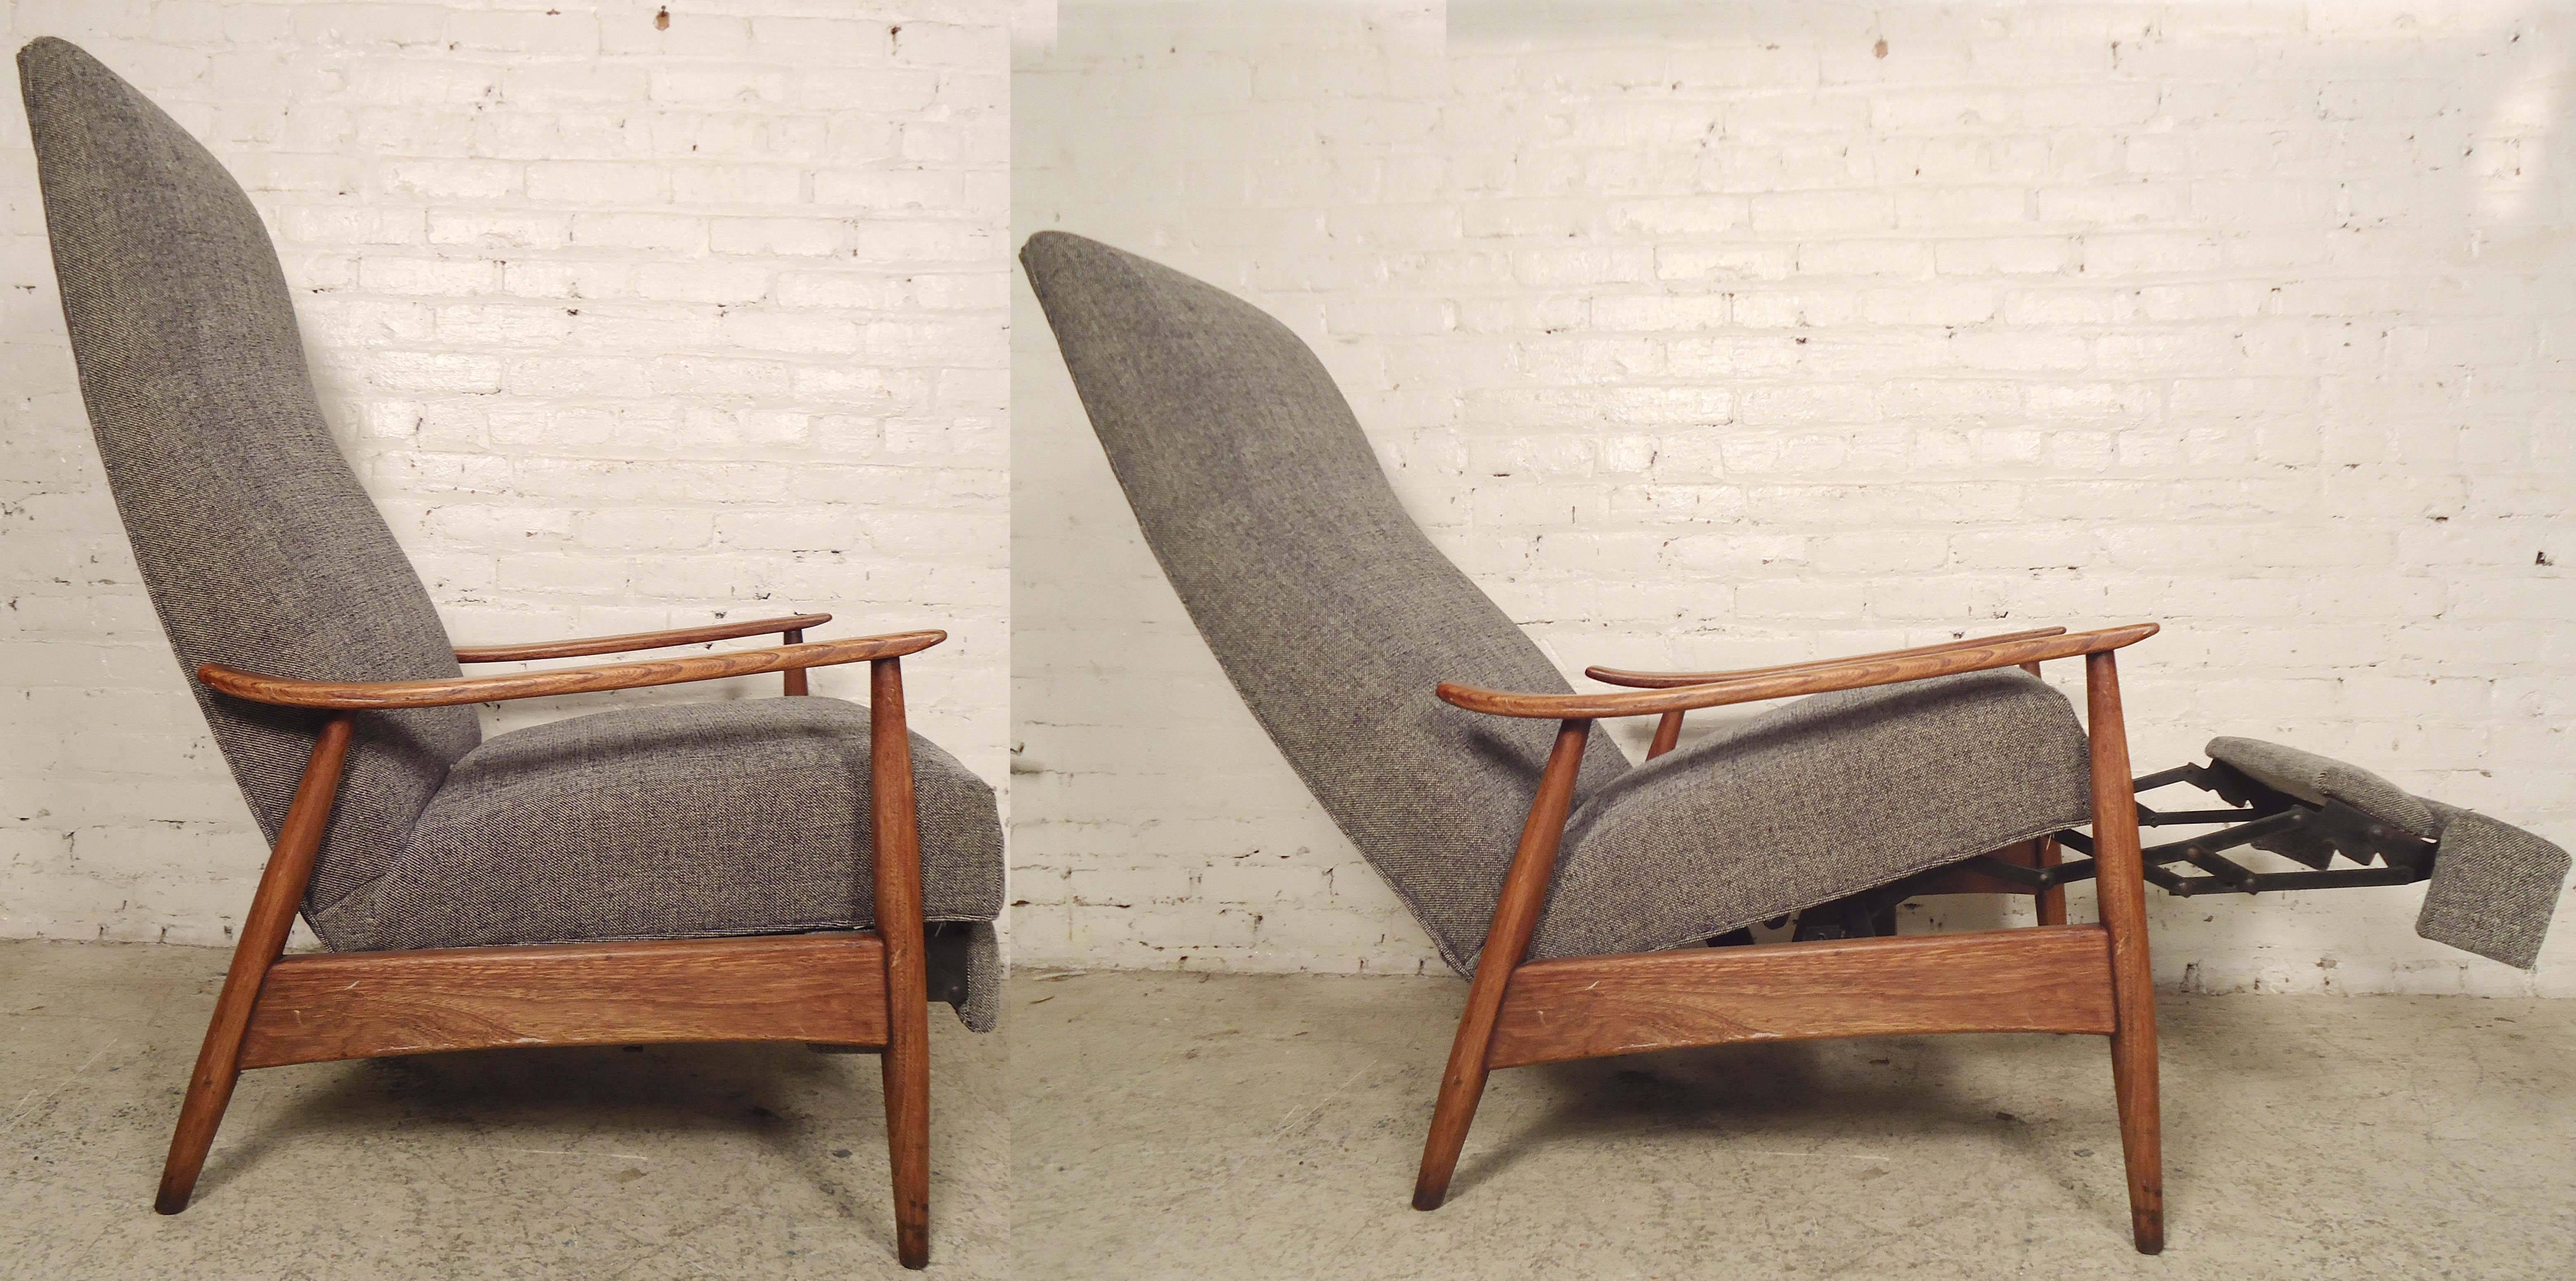 Vintage modern reclining lounge chair designed by Milo Baughman. Great lines throughout the walnut frame, upholstered footrest, easy reclining action.

(Please confirm item location NY or NJ with dealer).
                            